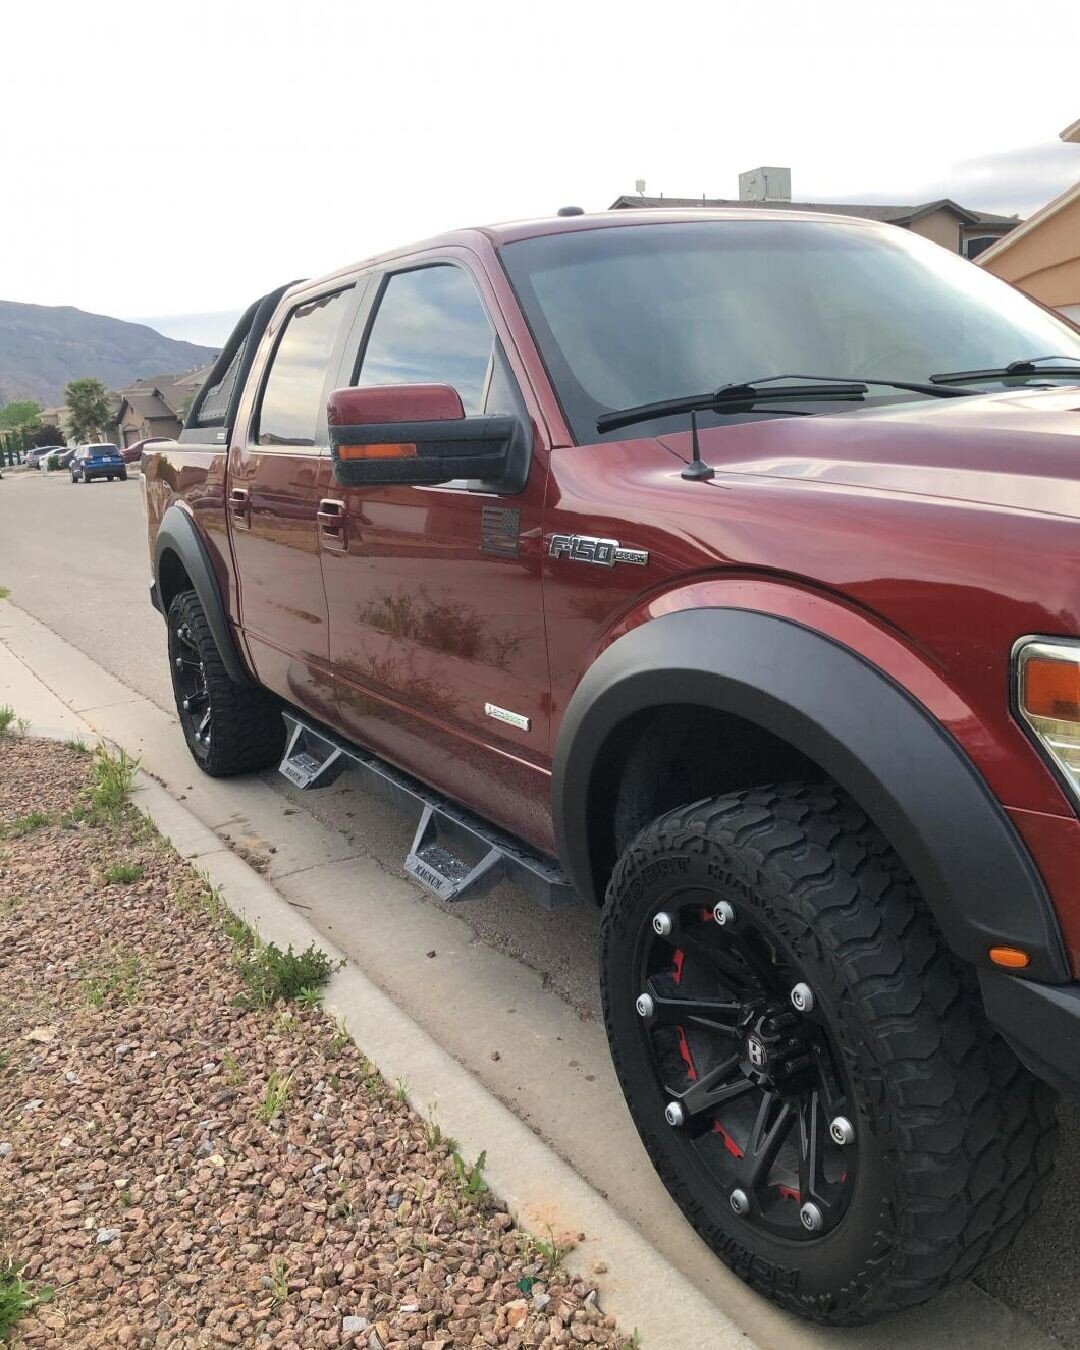 Why yes, our Raptor Flares do offer a good amount of tire coverage. Two inches to be exact!
#ProvenGround
#liftedtrucks
#TrucksDaily
#Trucks
#T529122